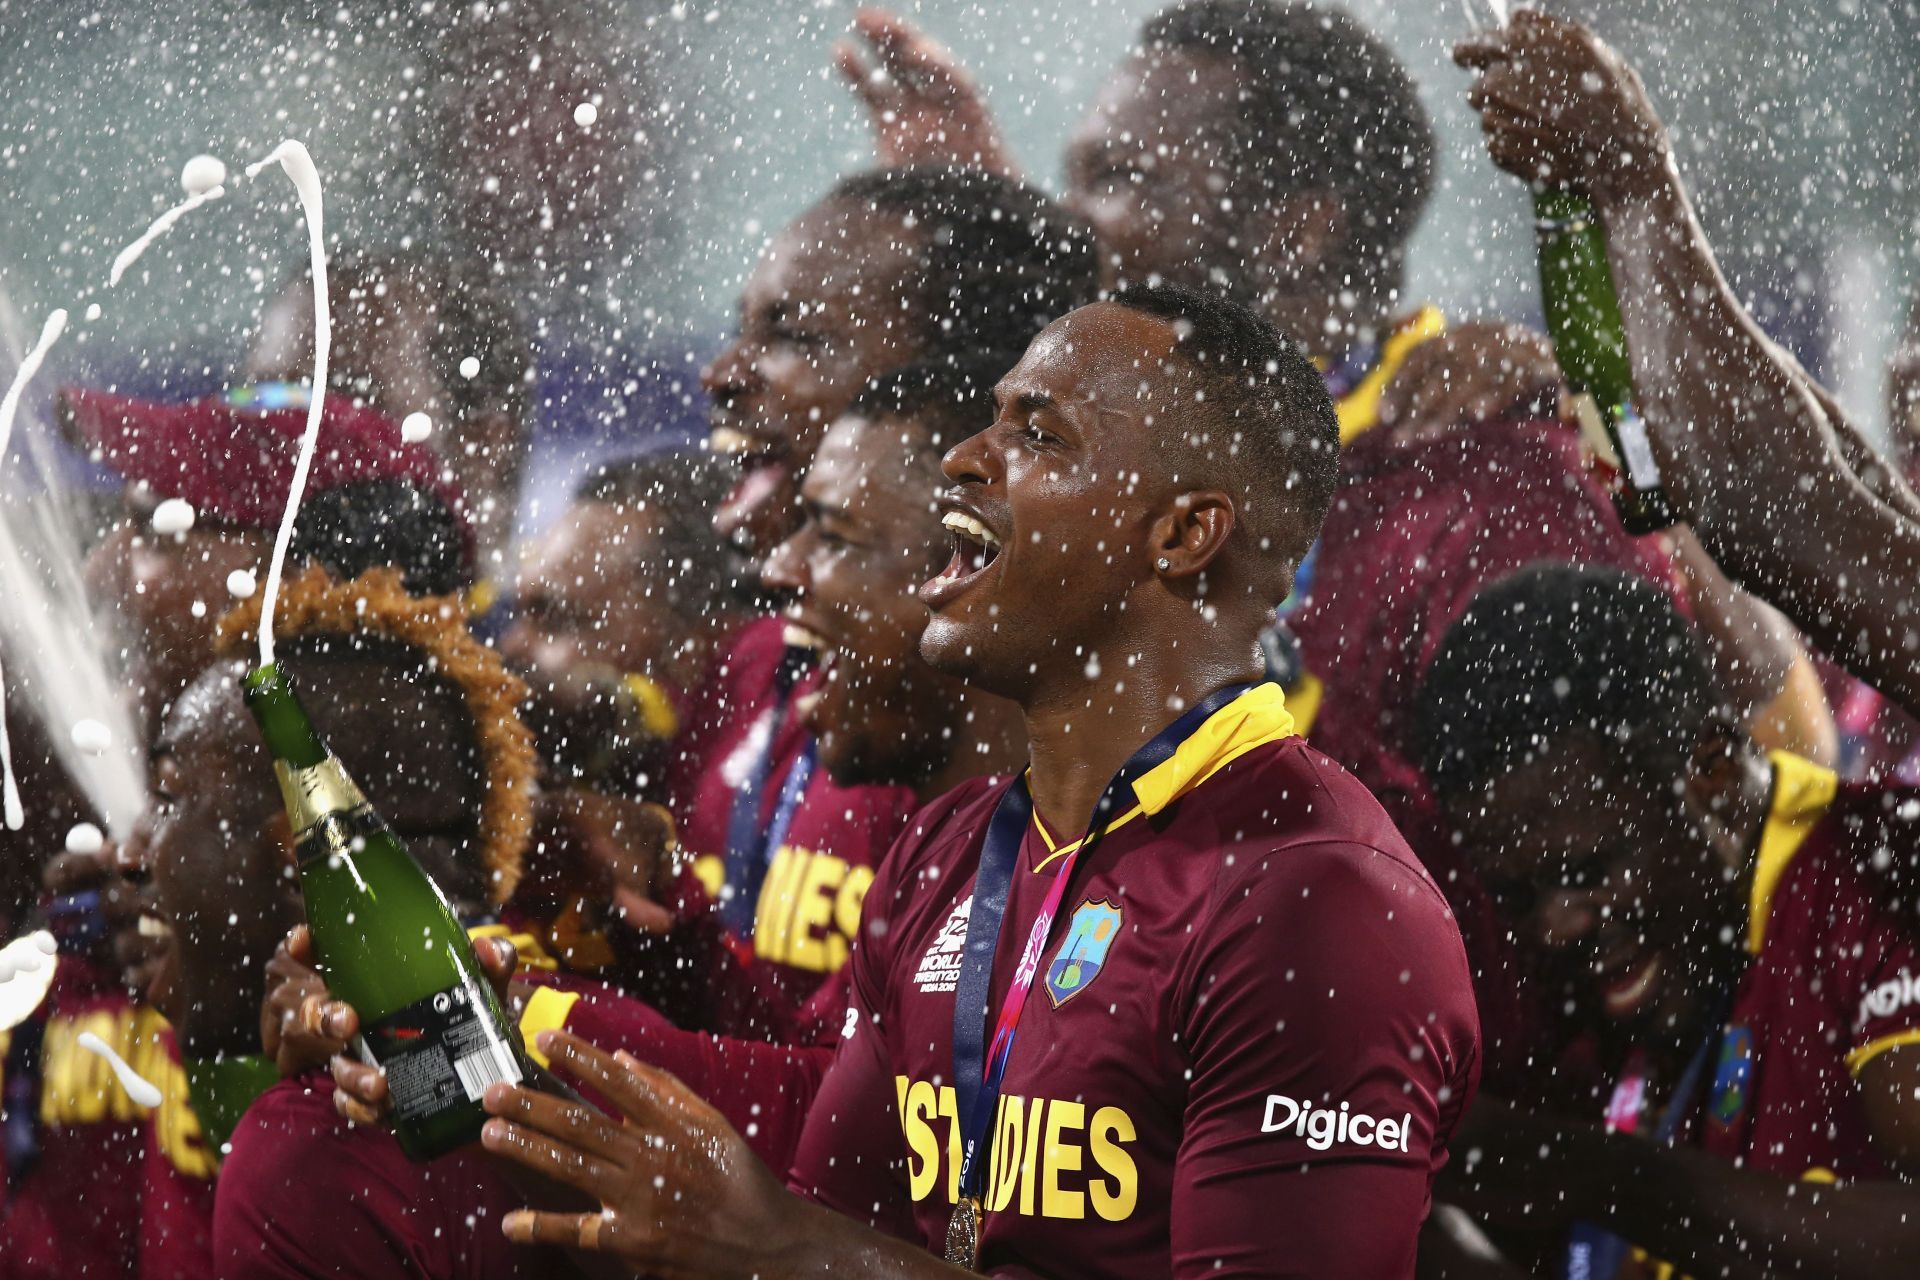 West Indies won the ICC T20 World Cup 2016 by defeating England in the final at Eden Gardens